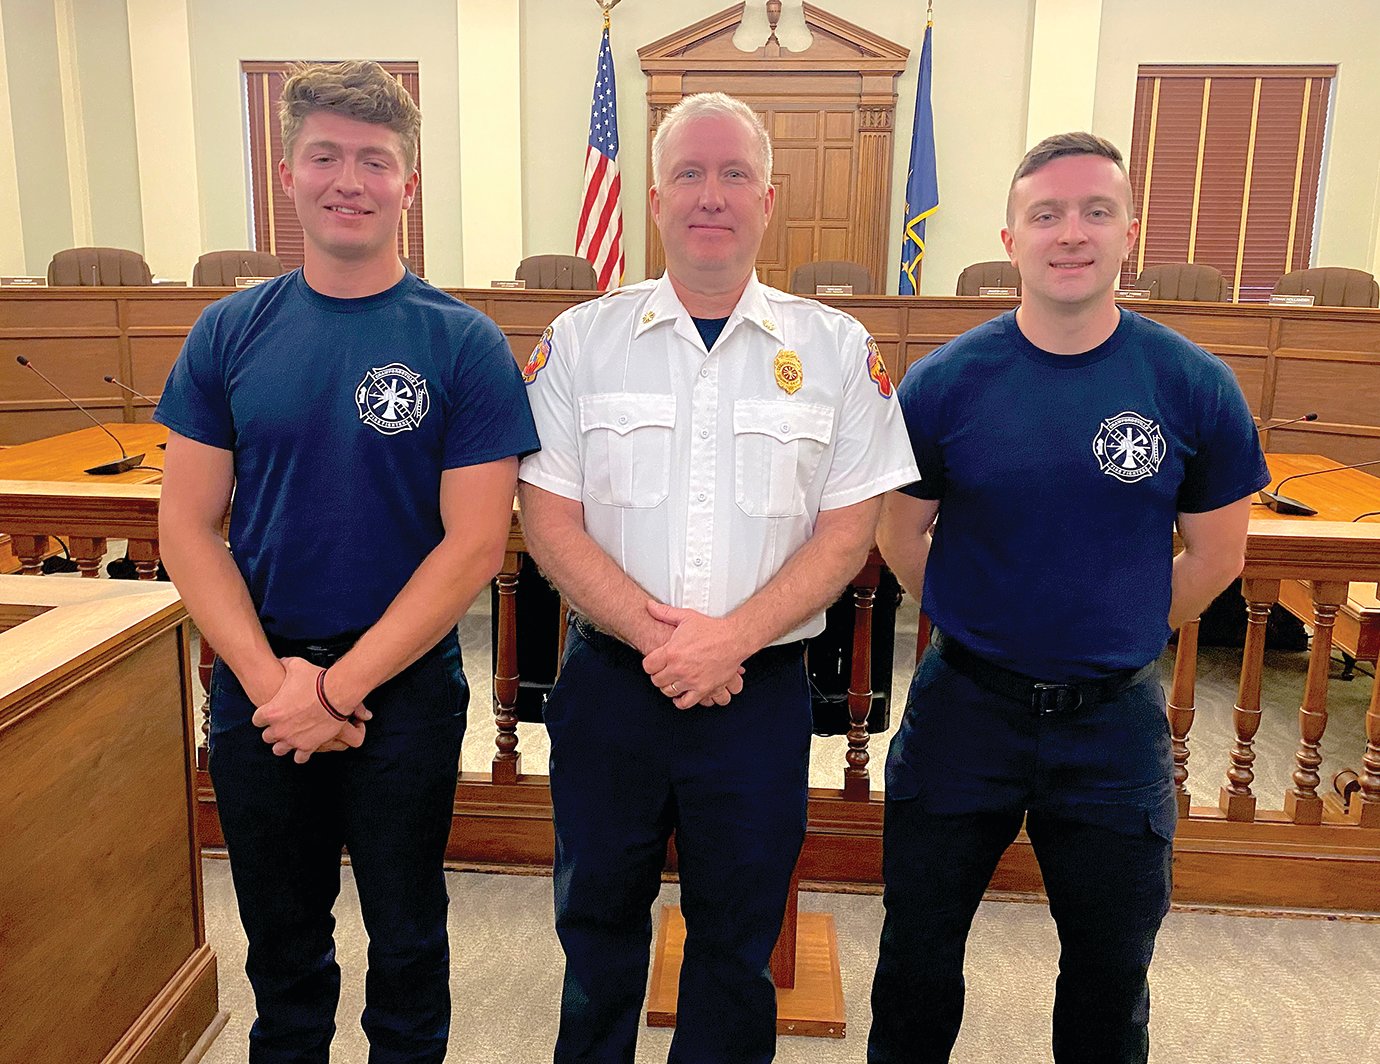 Crawfordsville Fire Department Chief Scott Busenbark, center, welcomes the city’s newest firefighters to the department Wednesday following the traditional swearing in of officers. Grant Kennedy, left, and Chris Thibaut, at City Hall.